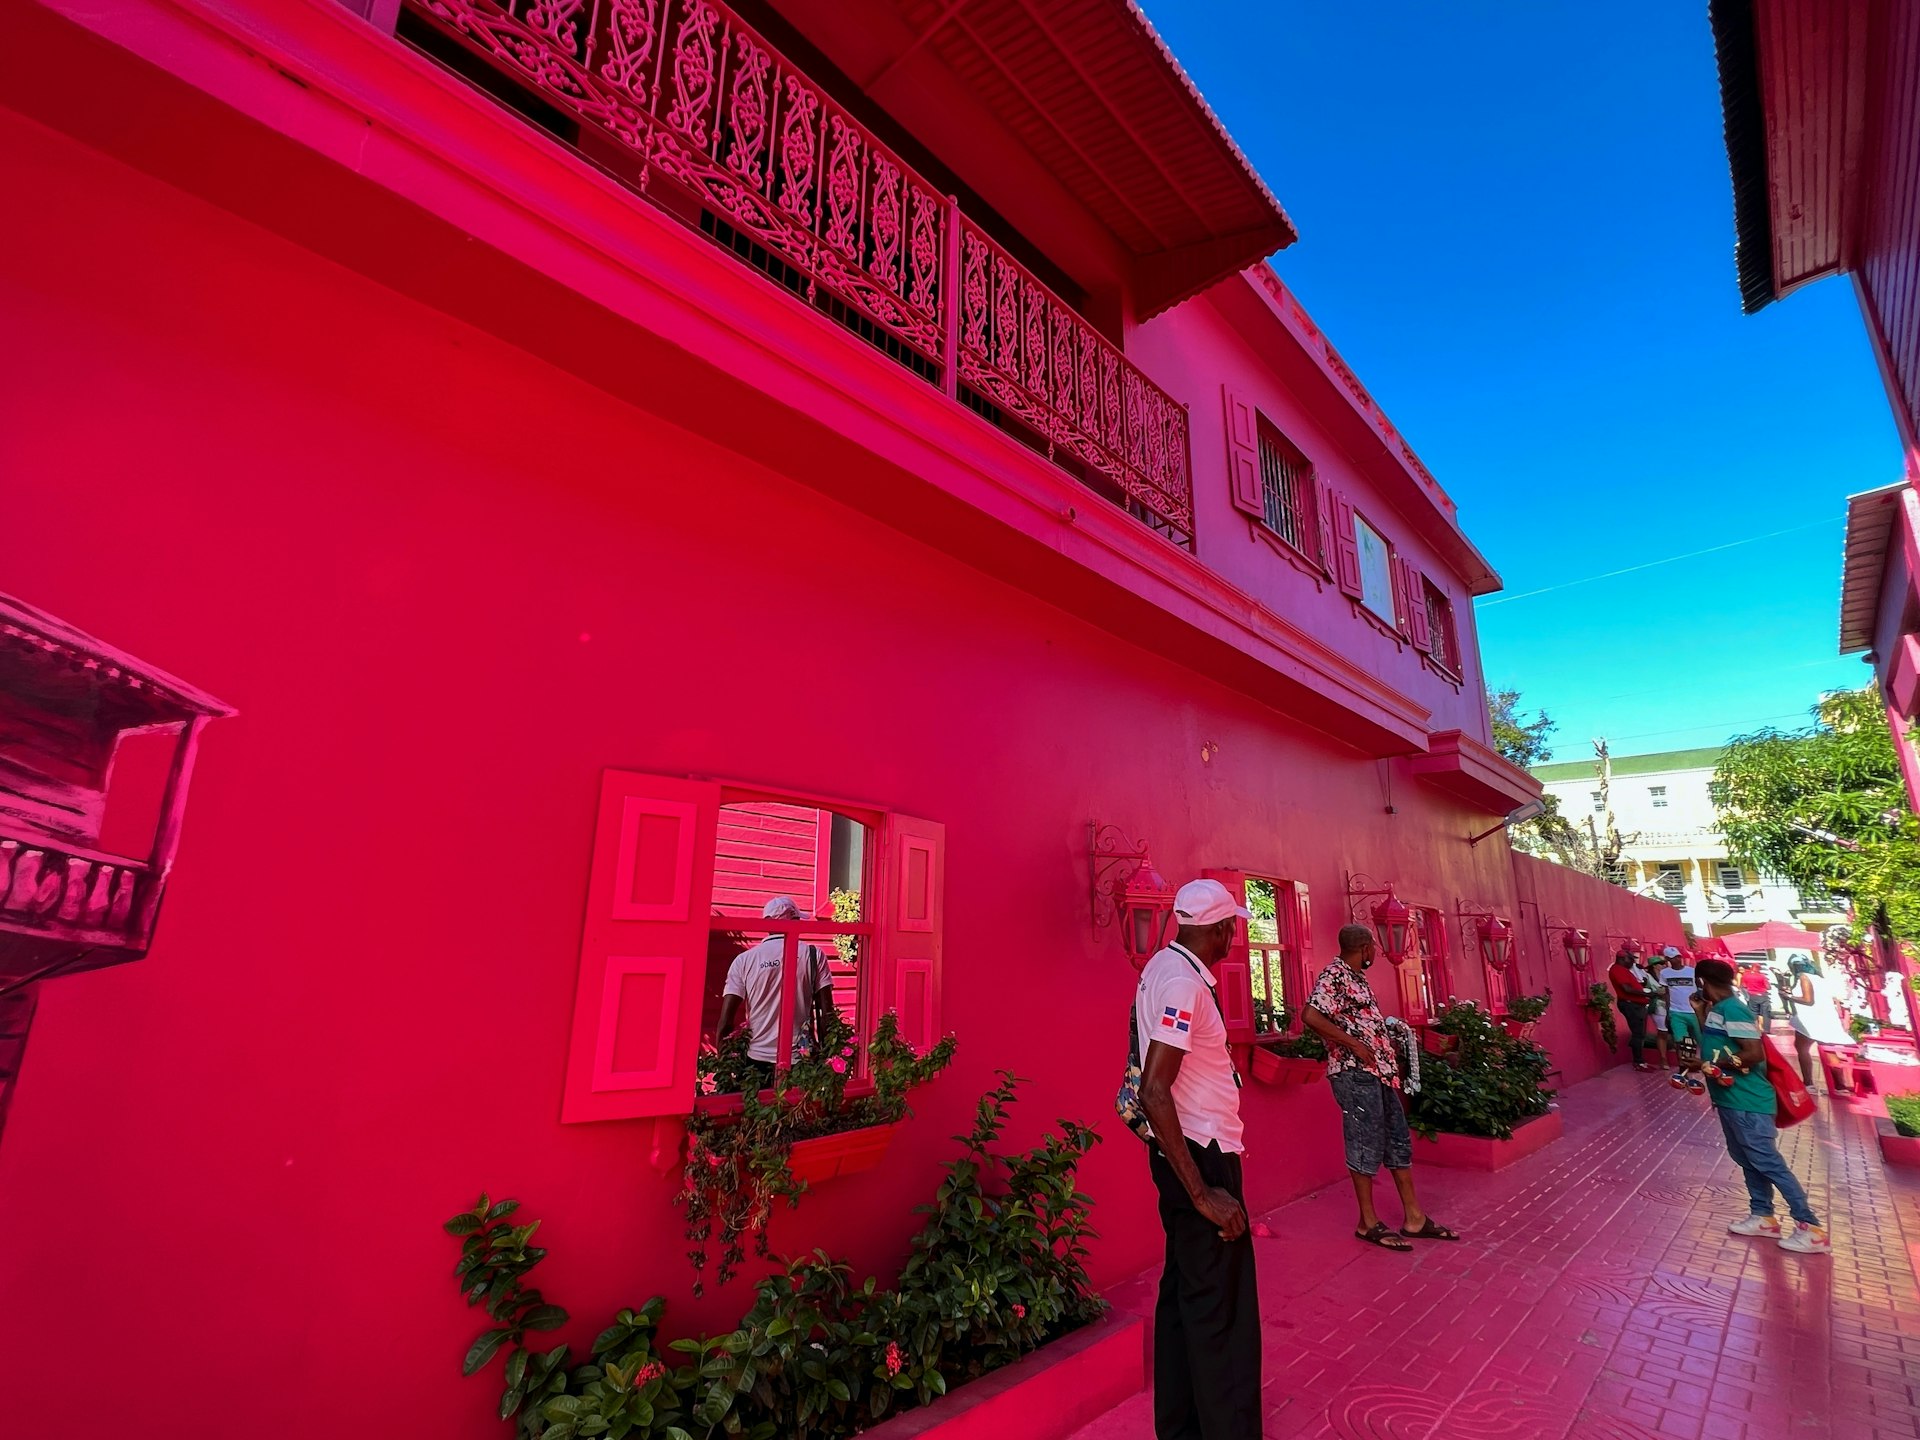 People playing and socializing on the Pink Street in Puerto Plata